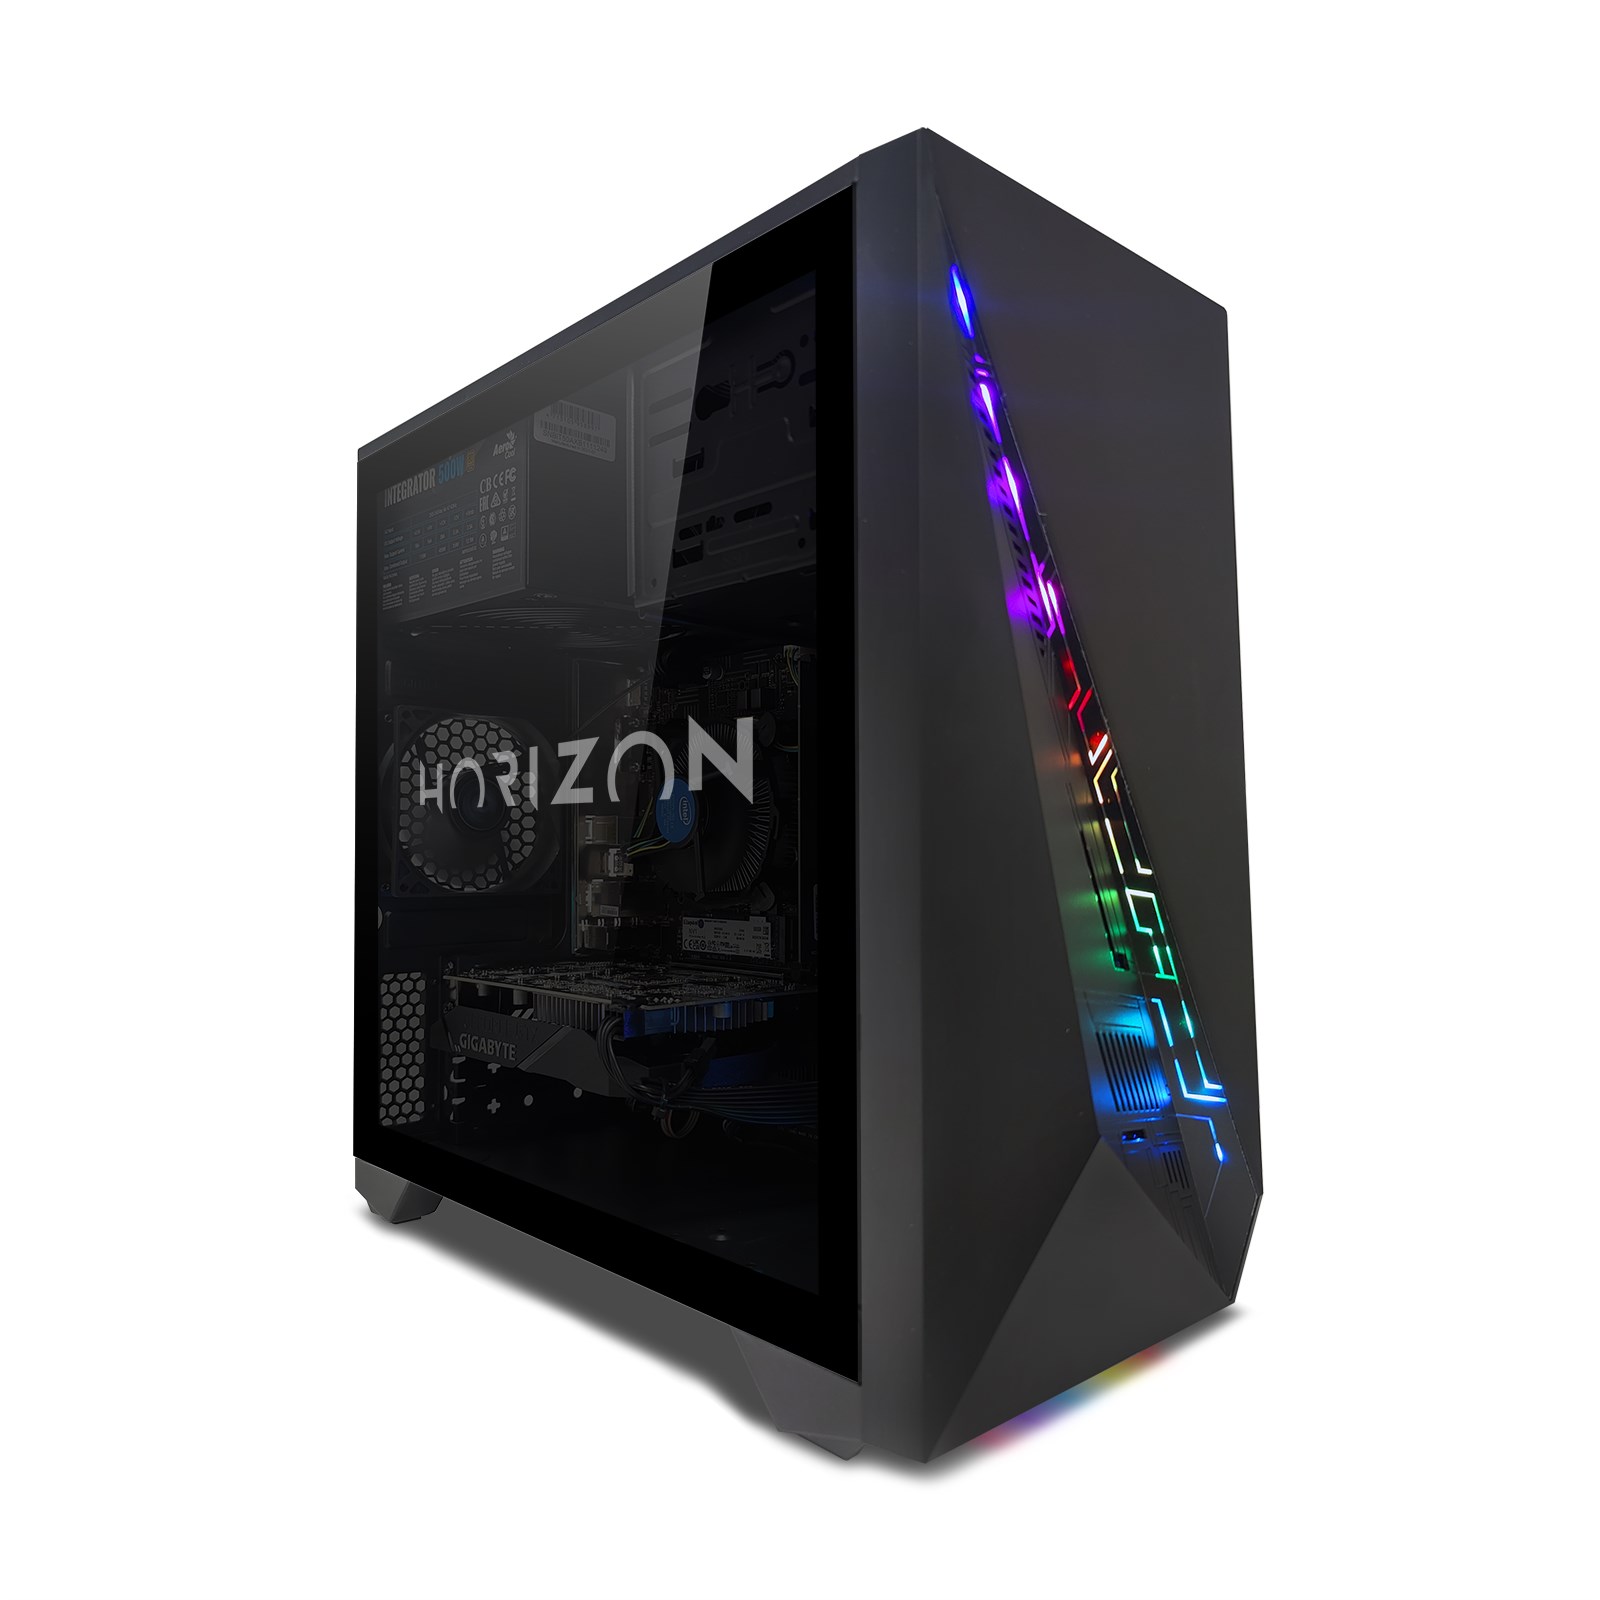 A front angled view of the Horizon 5 Vega Gaming PC